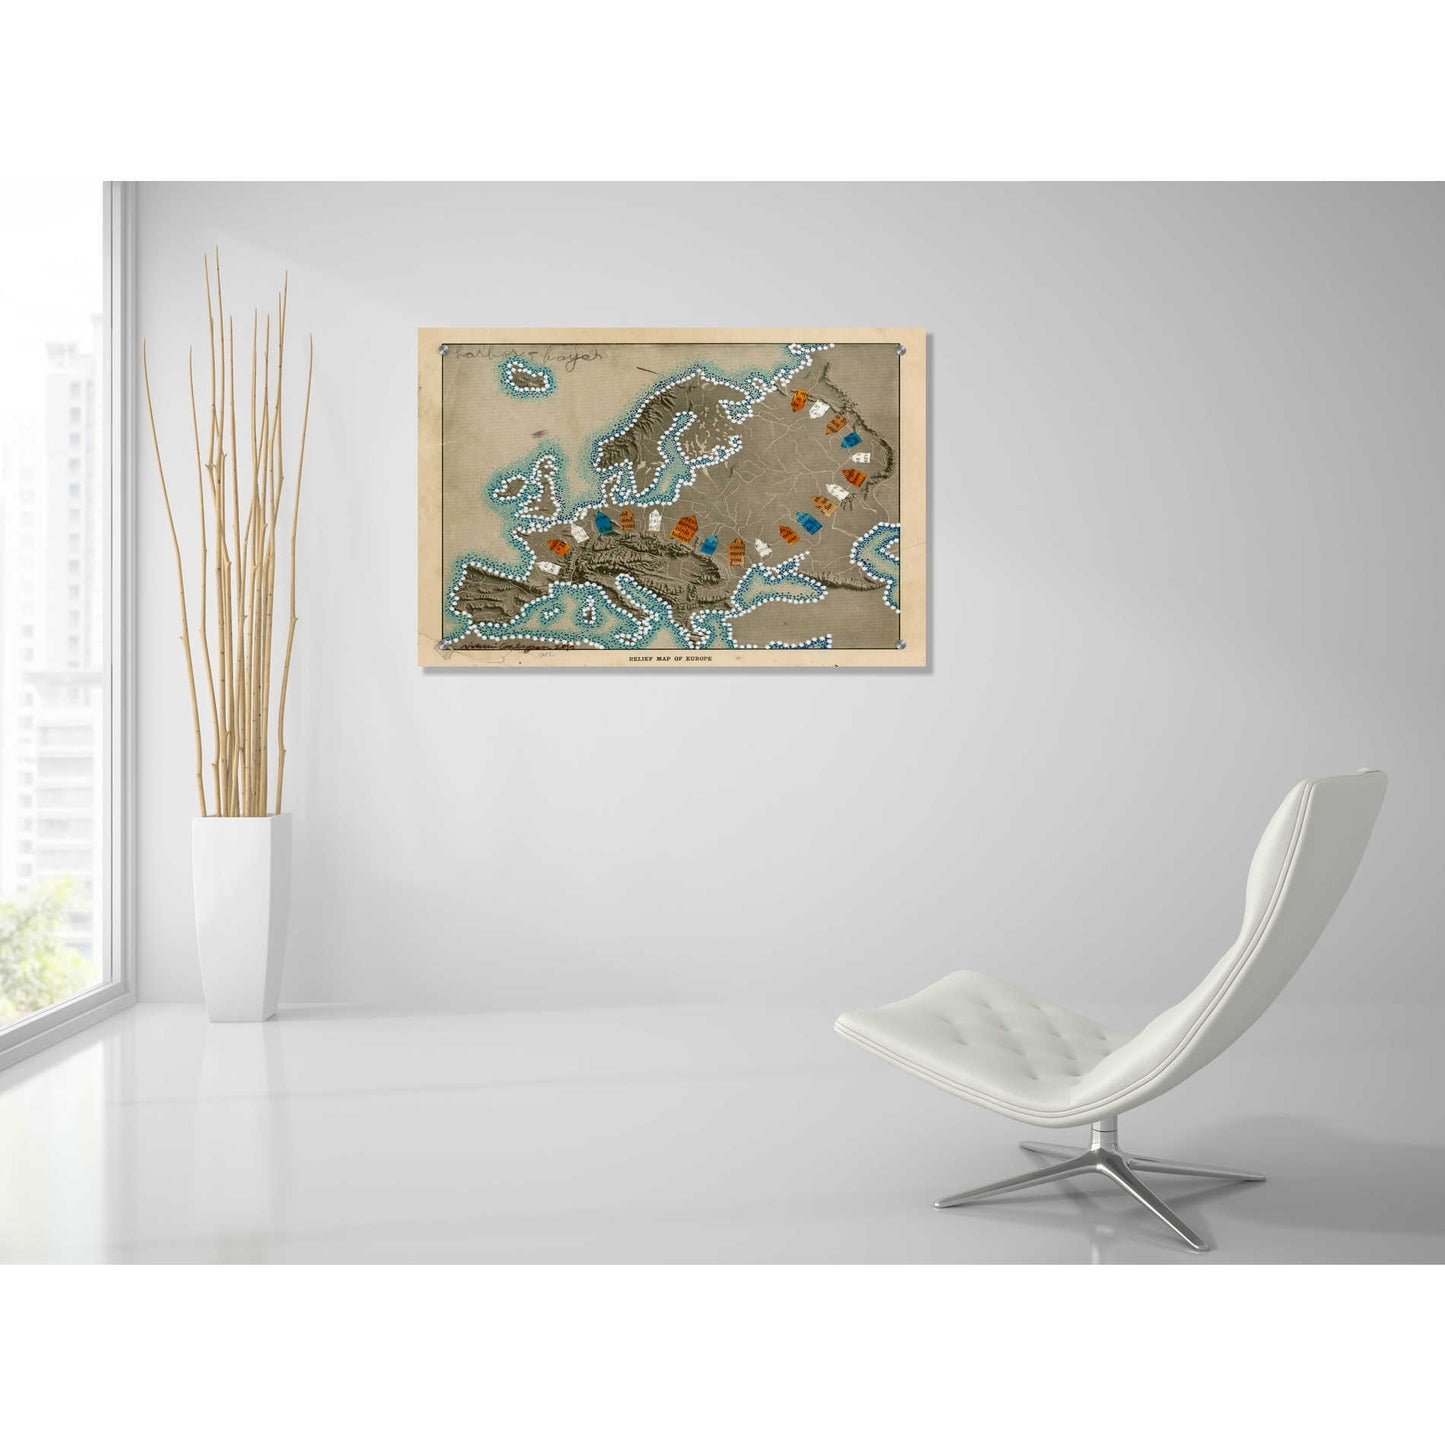 Epic Art 'Relief Map of Europe' by Nikki Galapon, Acrylic Glass Wall Art,36x24